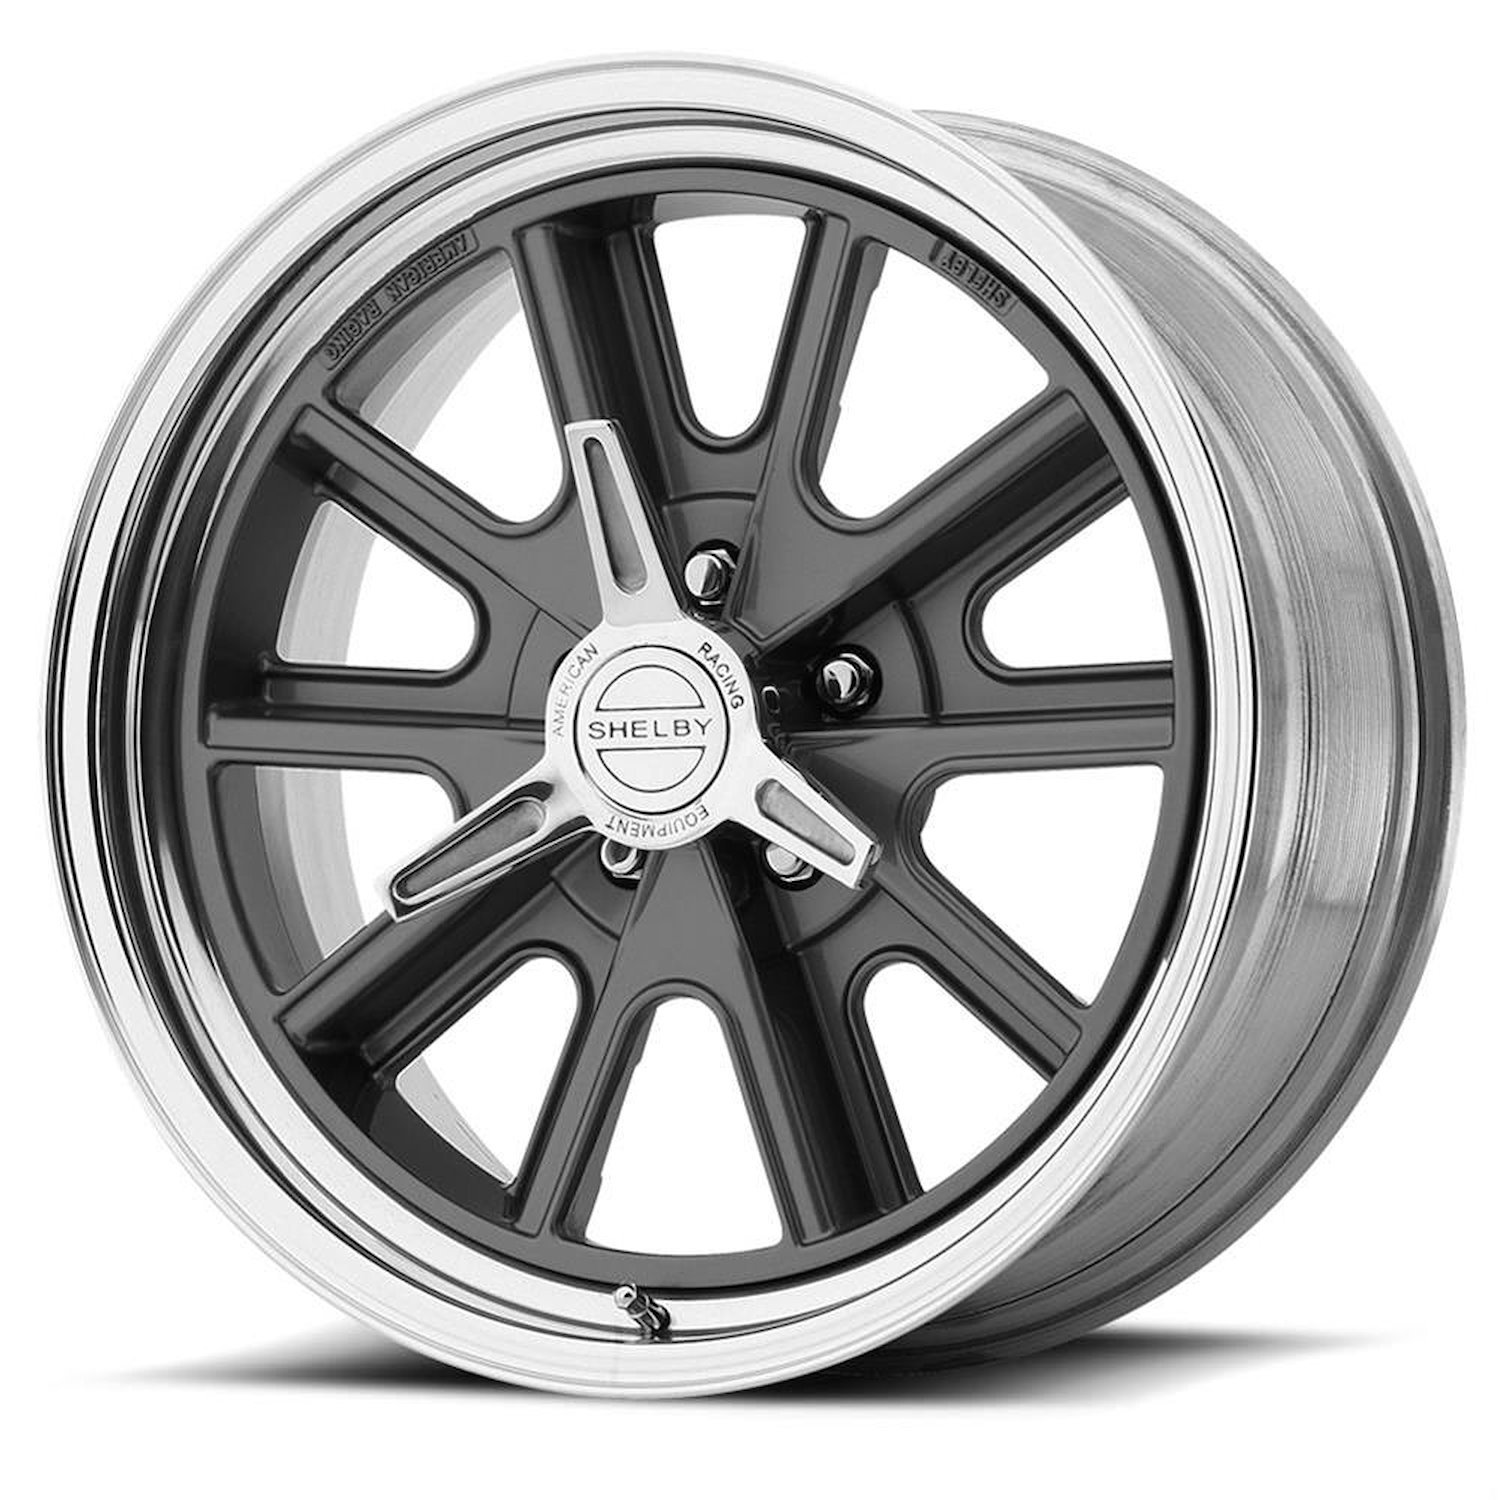 AMERICAN RACING 427 SHELBY COBRA TWO-PIECE MAG GRAY CENTER POLISHED BARREL 17 x 8 5x4.5 -12 4.03